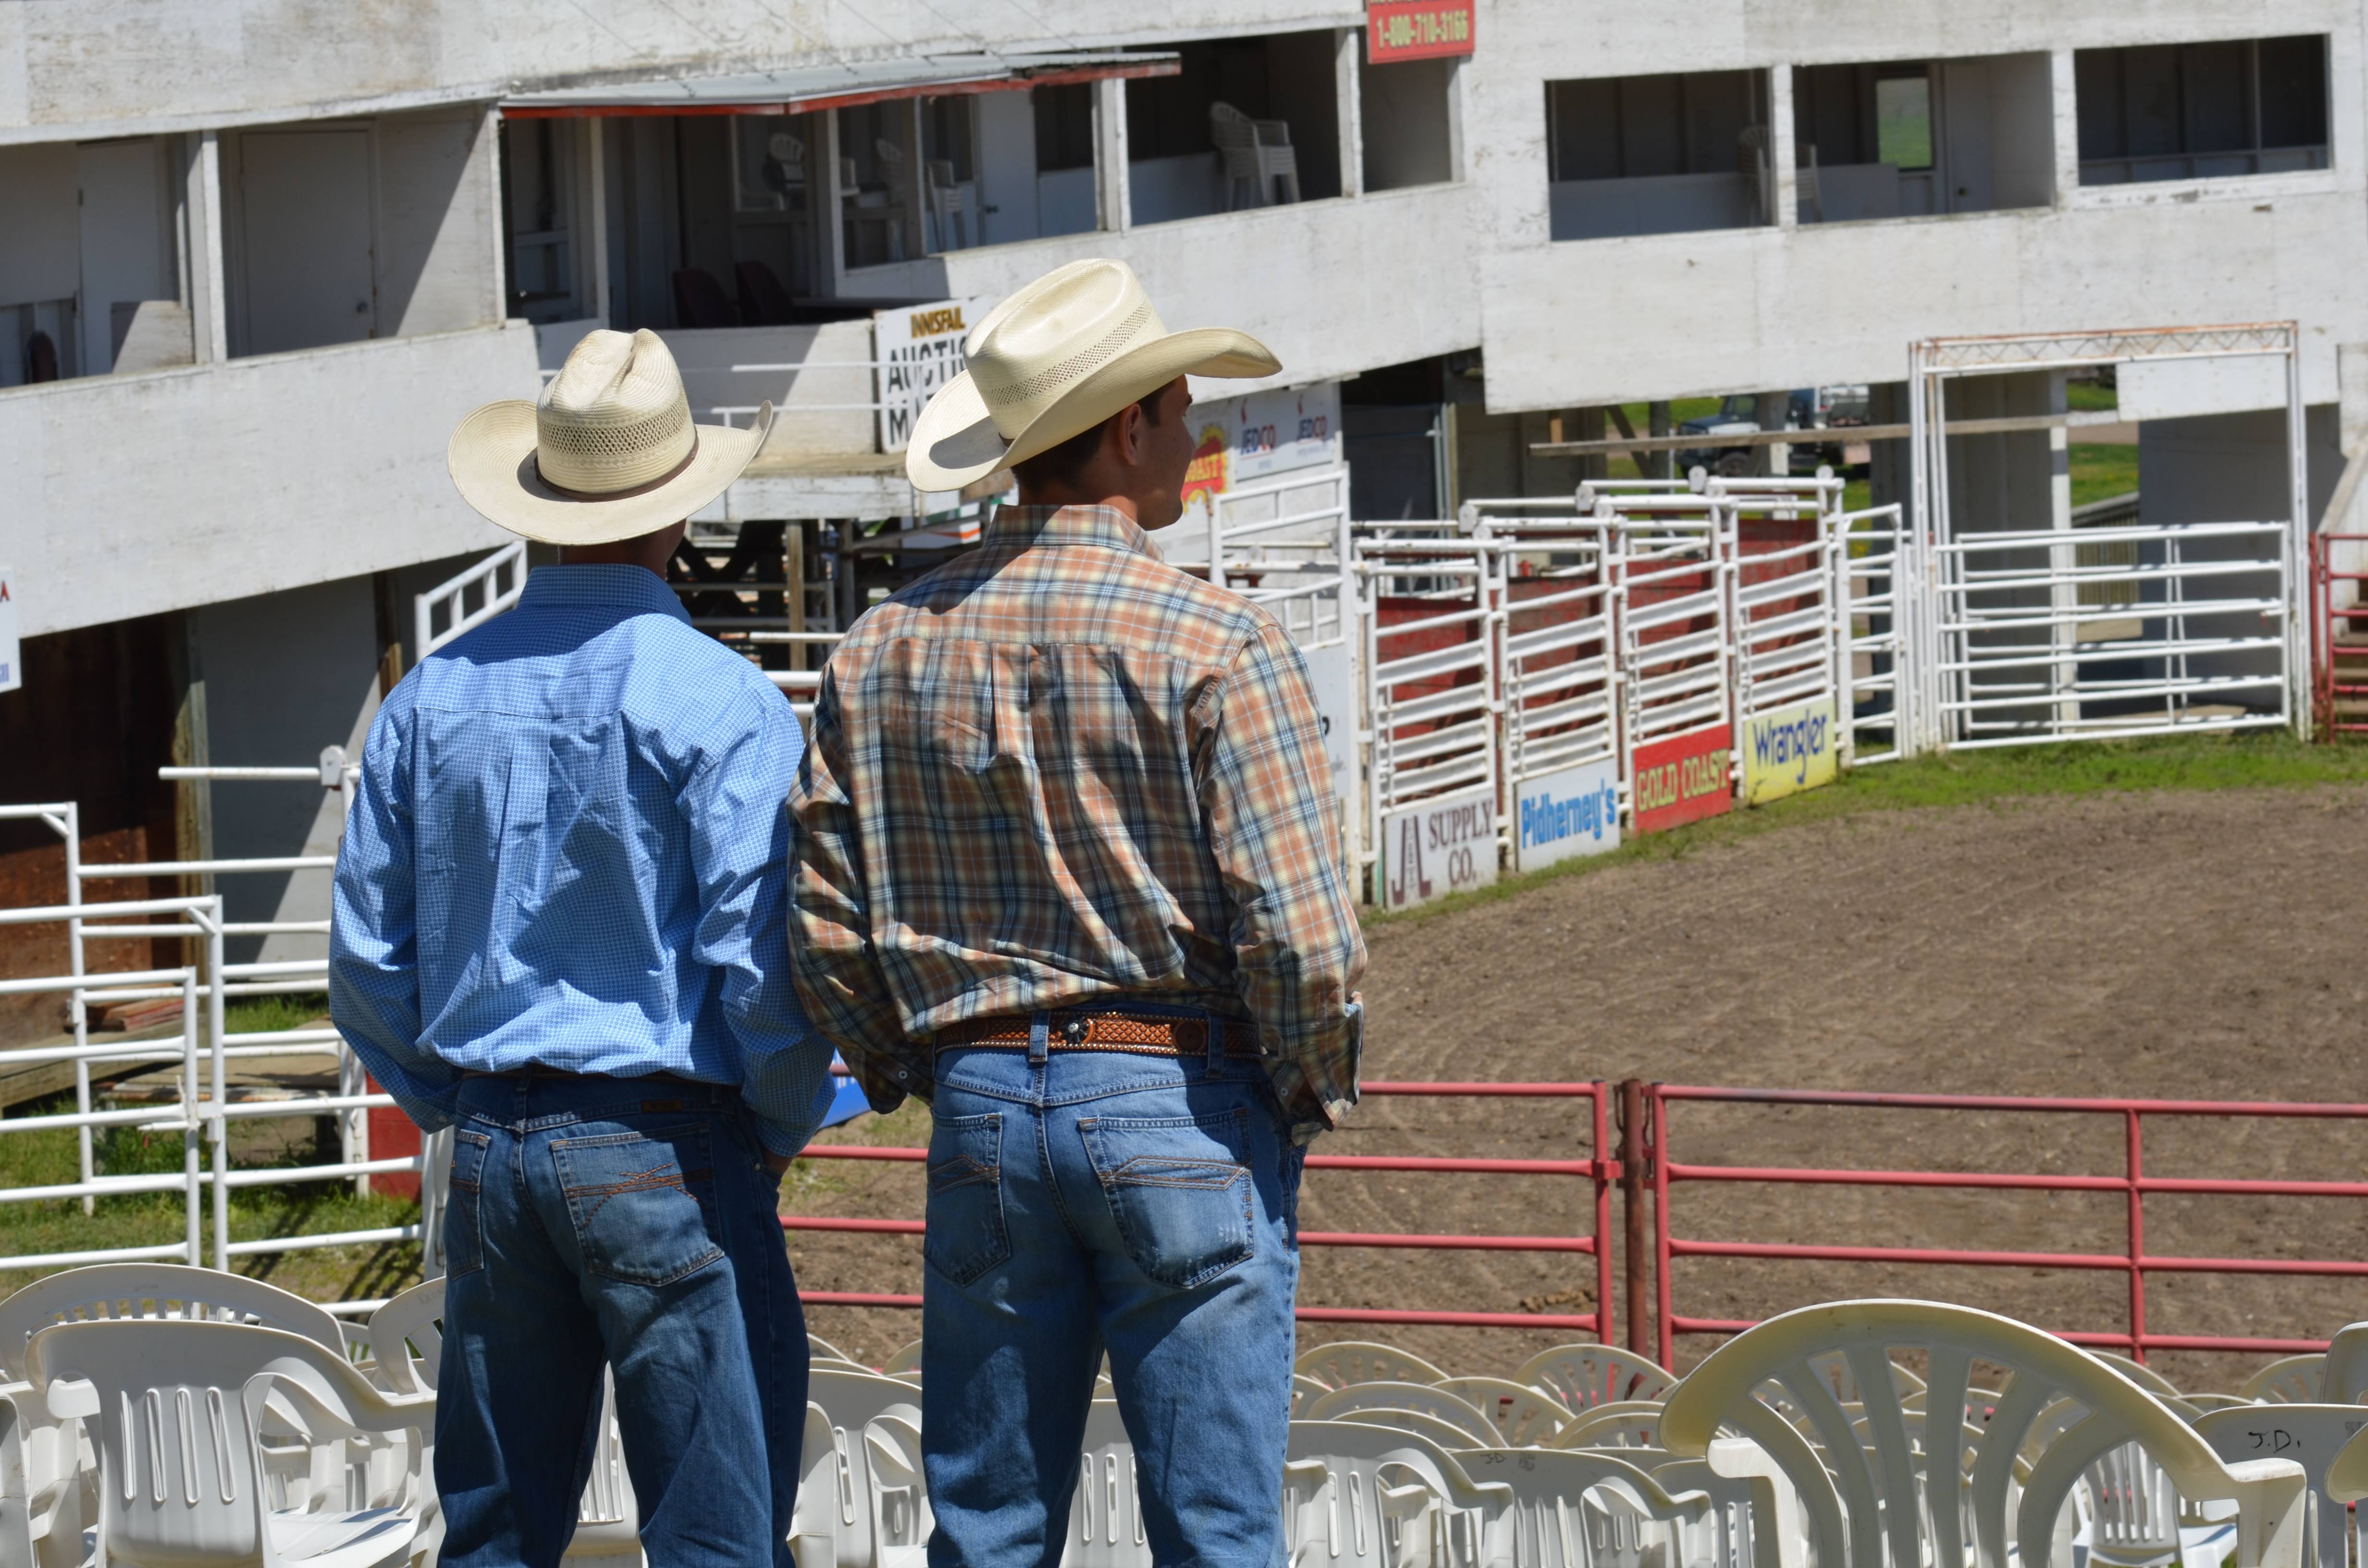 RODEO ROUND UP - Ben and Kirk Robinson